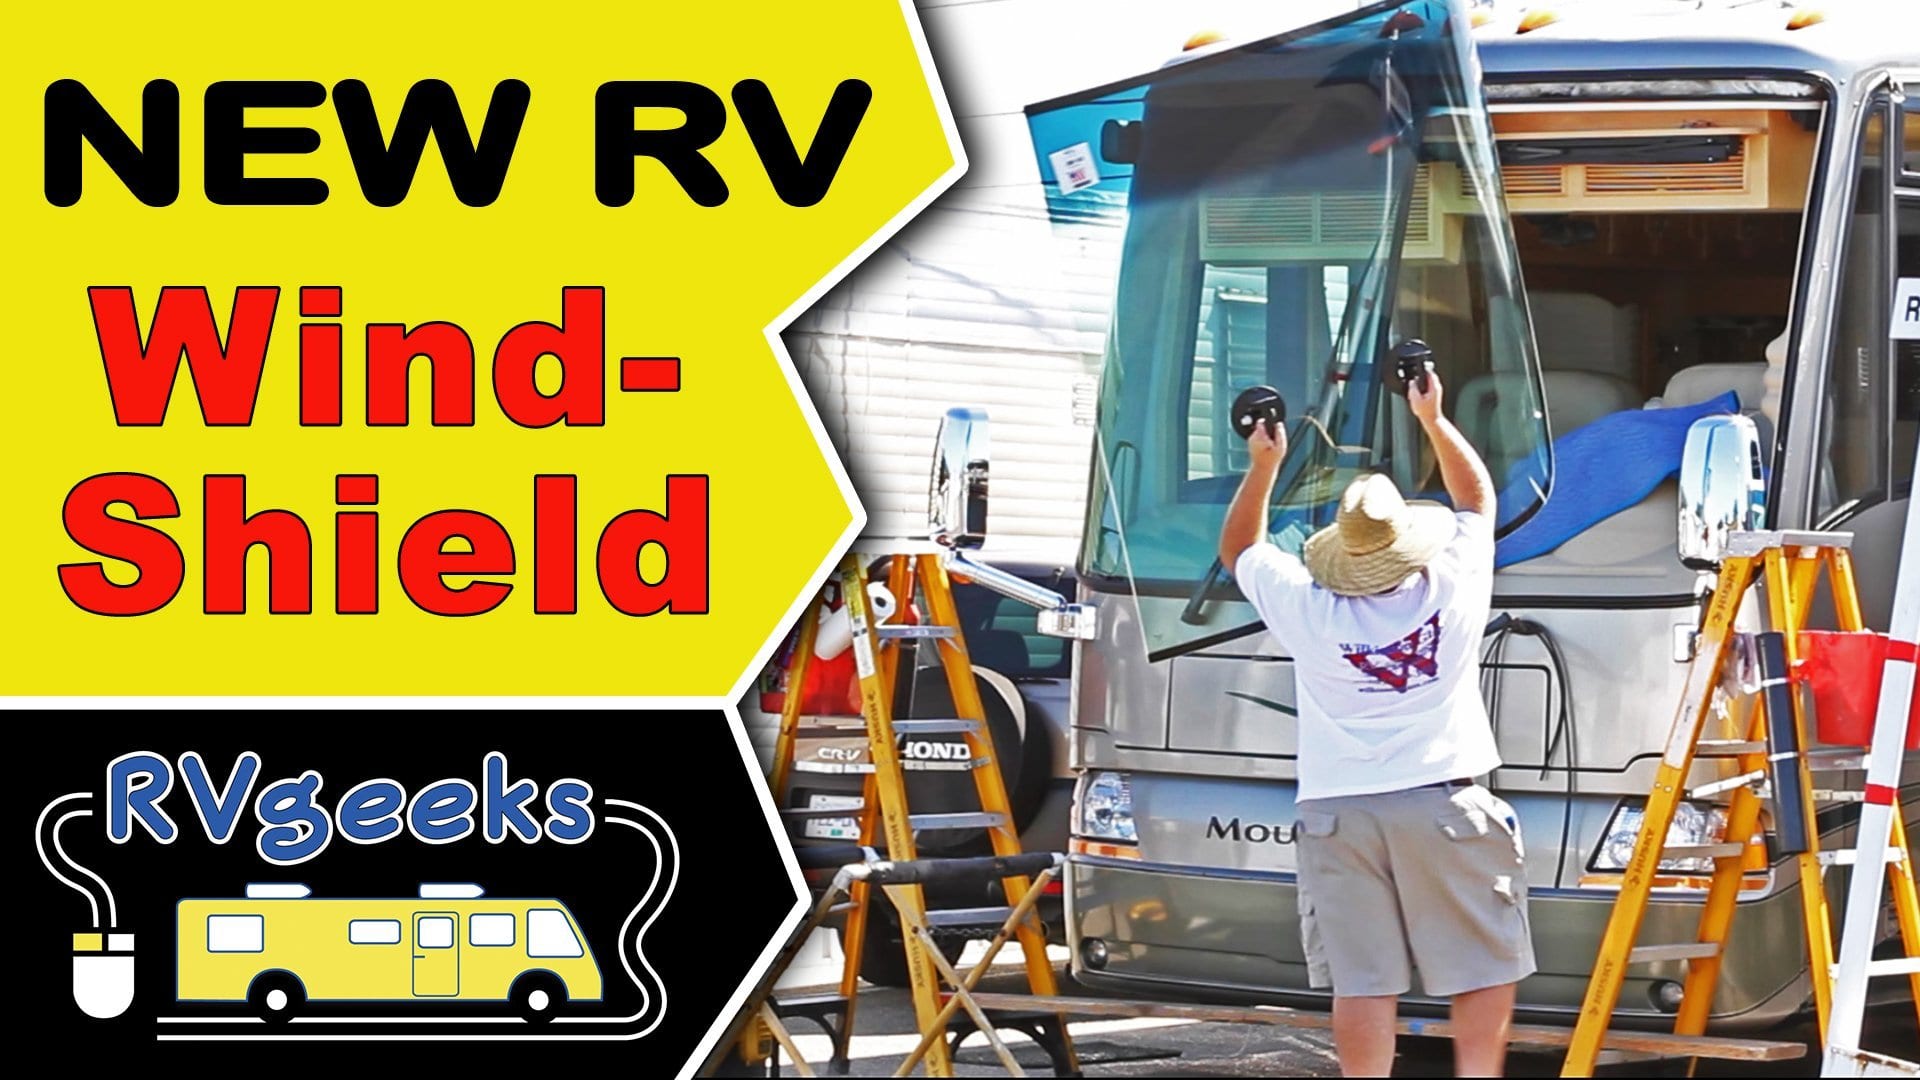 Motorhome Windshield Replacement